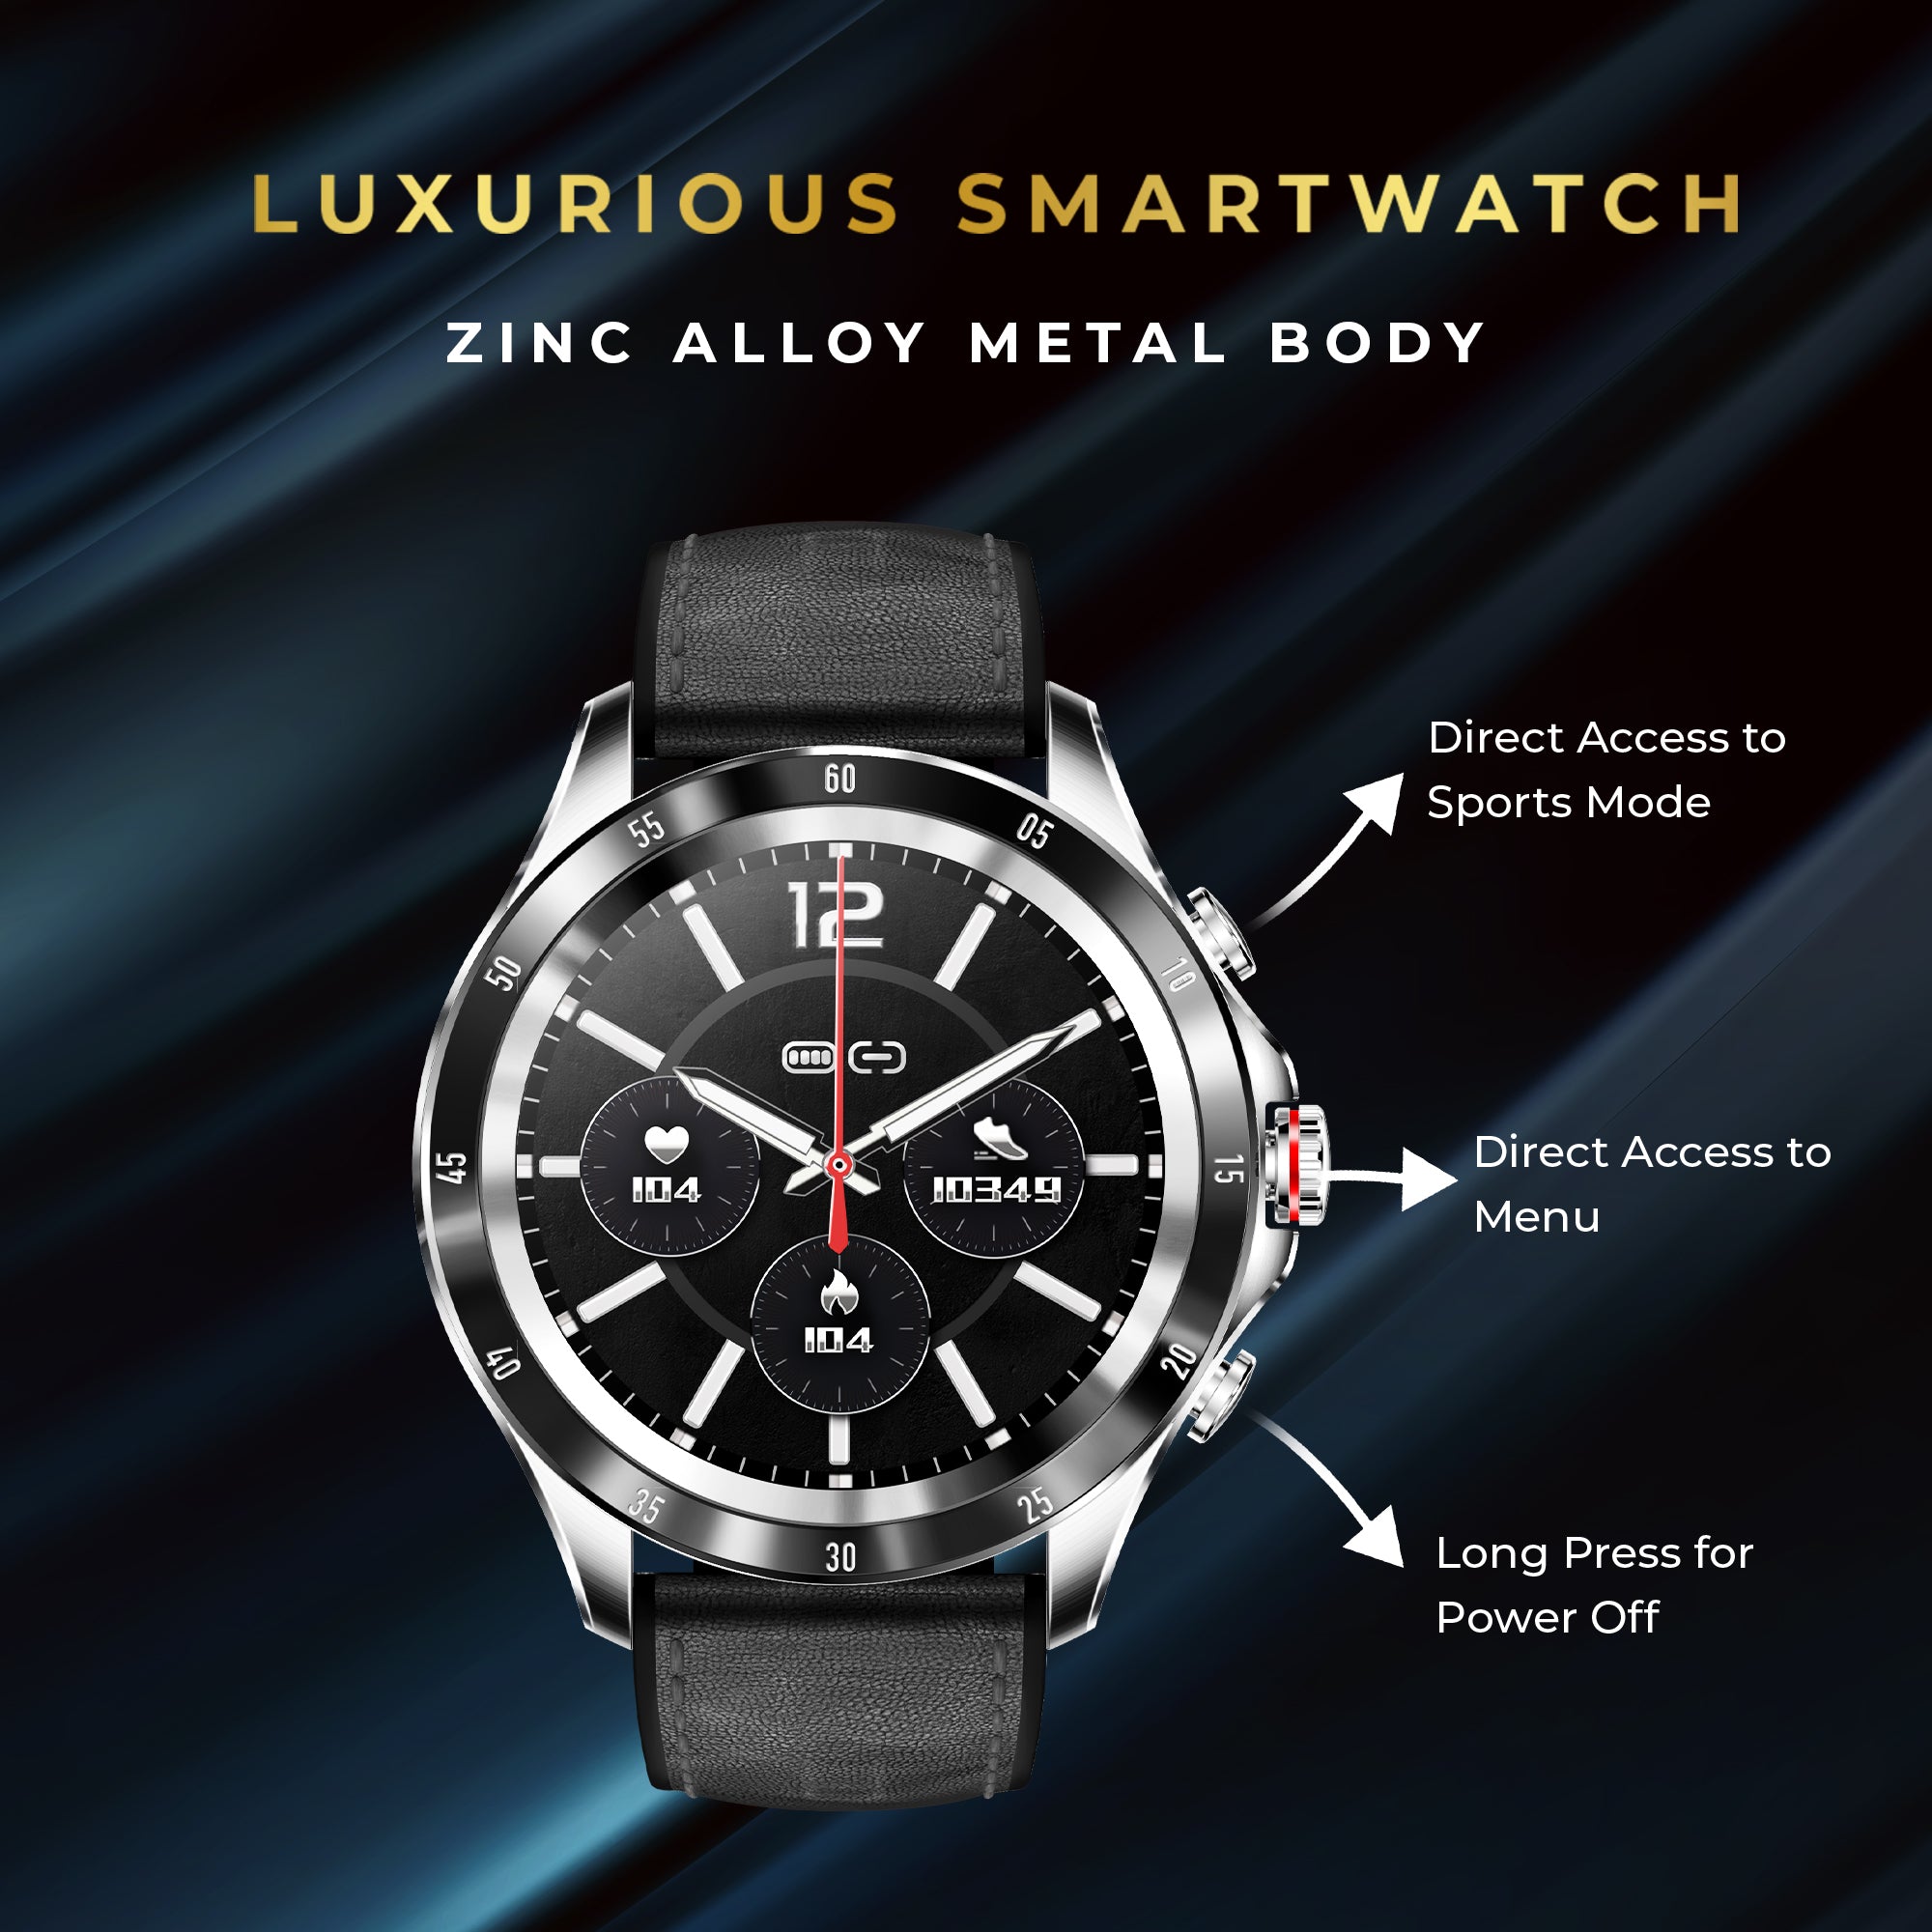 GIZMORE Glow Luxe AMOLED with 1.32 Inch HD Large Display | 500 NITS with Bluetooth Calling Smartwatch